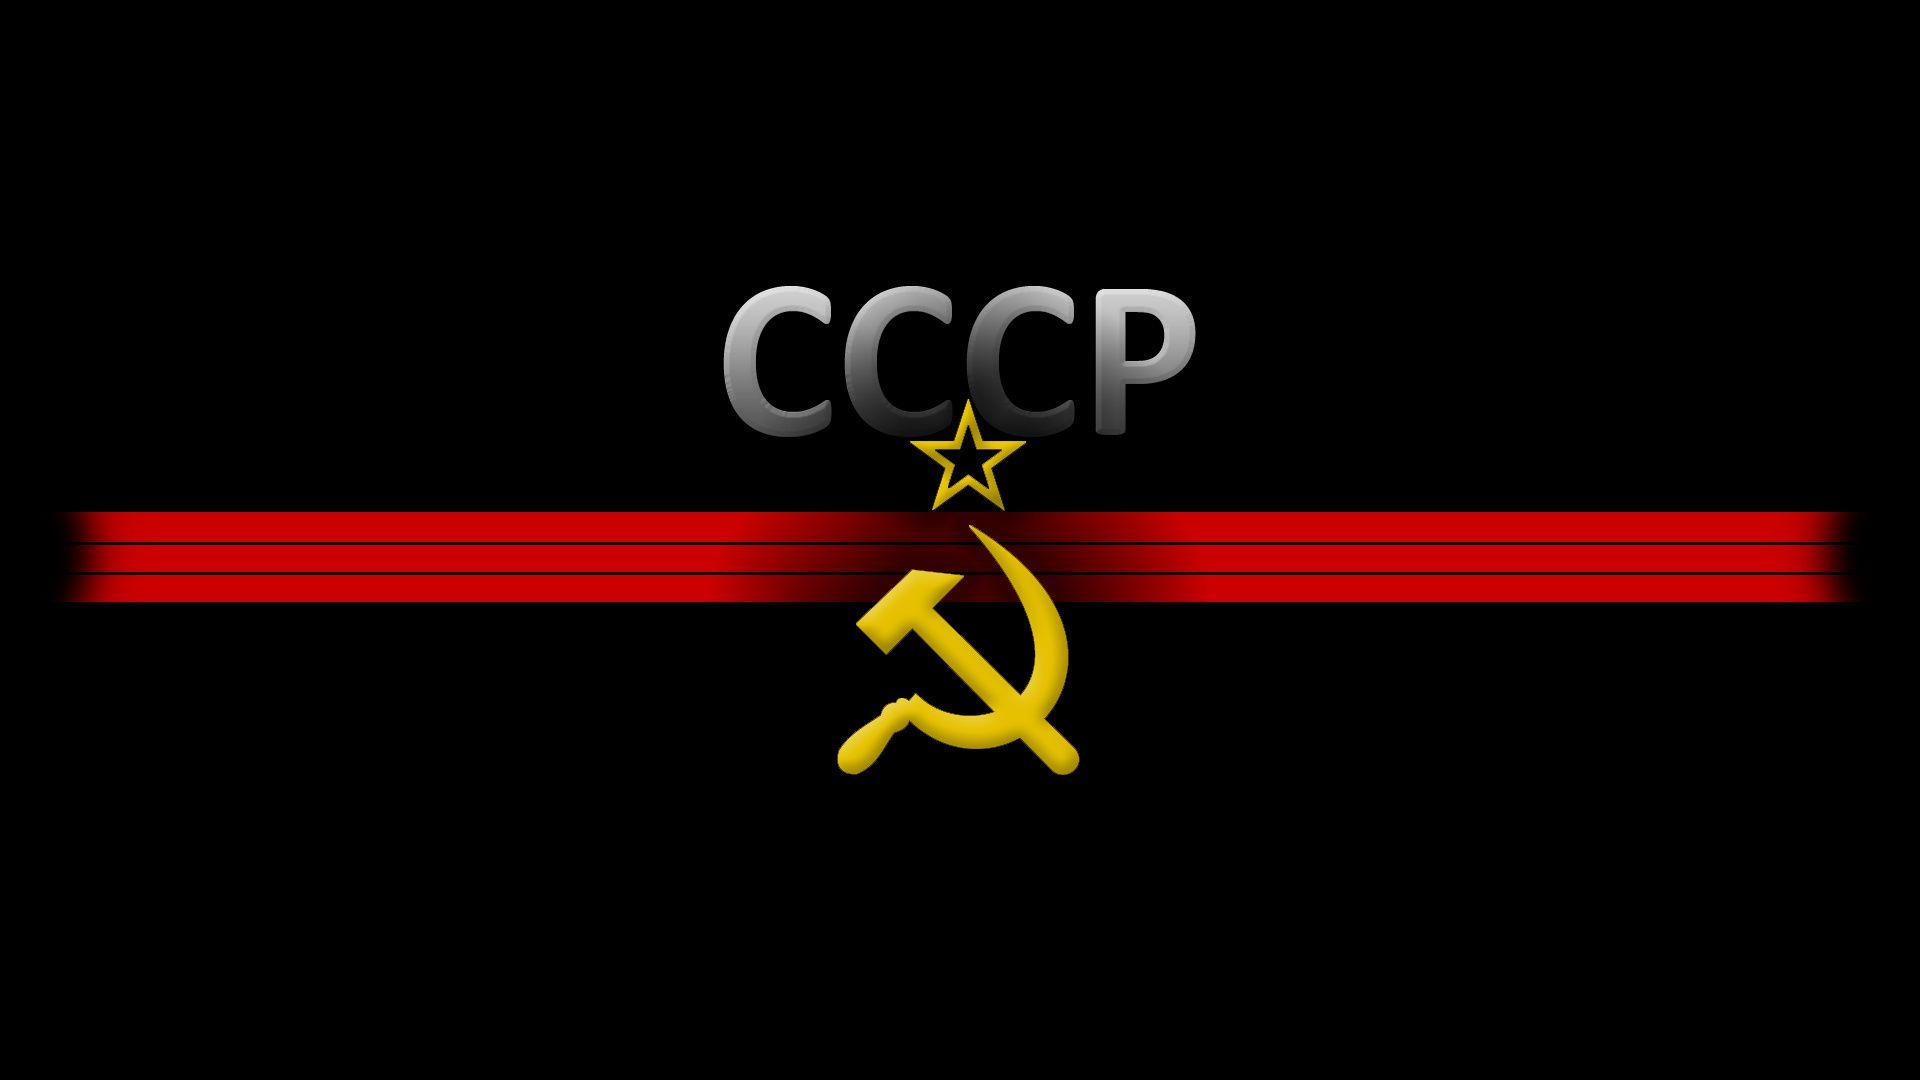 Ussr Wallpapers